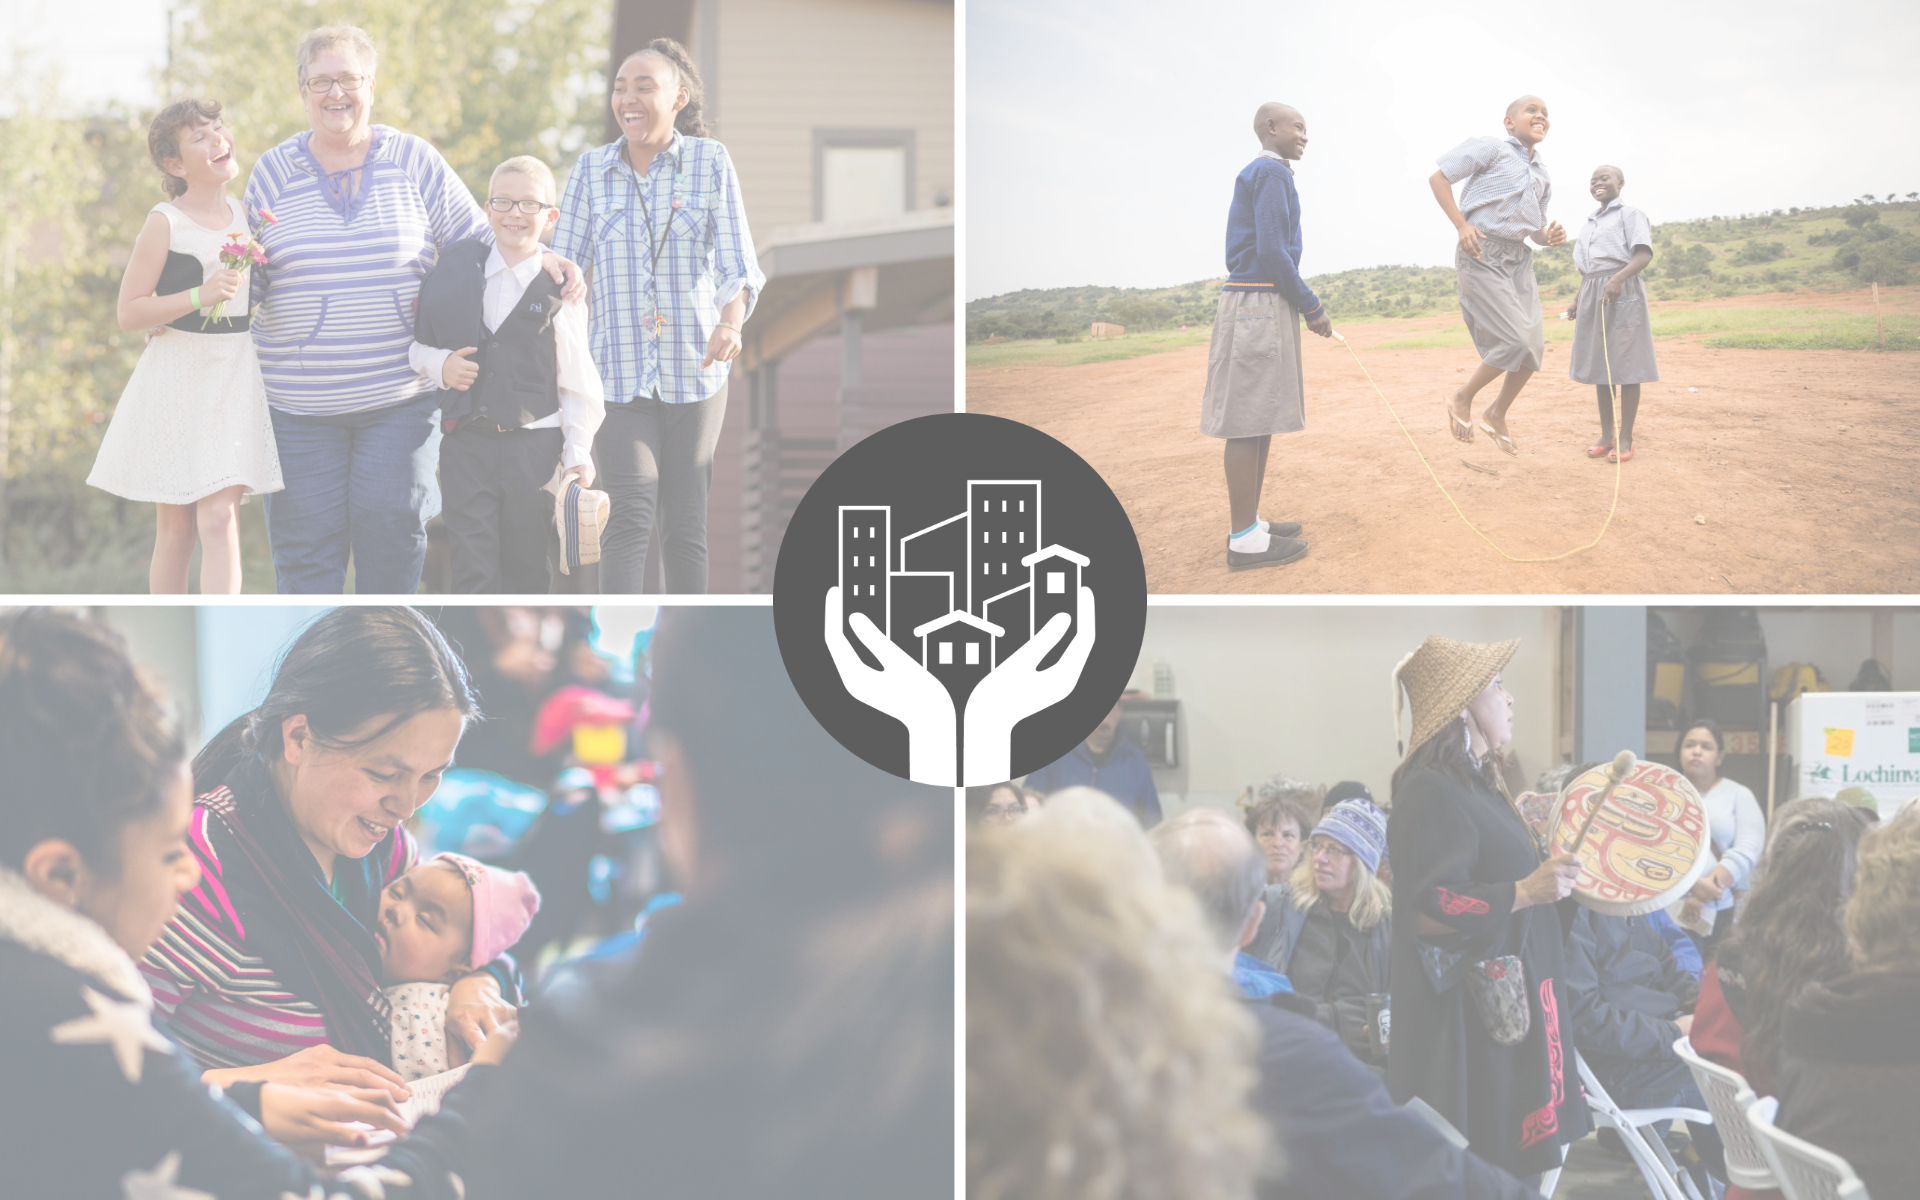 Top left: Adult woman walking with three smiling kids; Top right: three kids jumping rope; Bottom left: mother holding small sleeping infant; Bottom right: Alaskan woman singing during a ceremony for a homeless housing facility